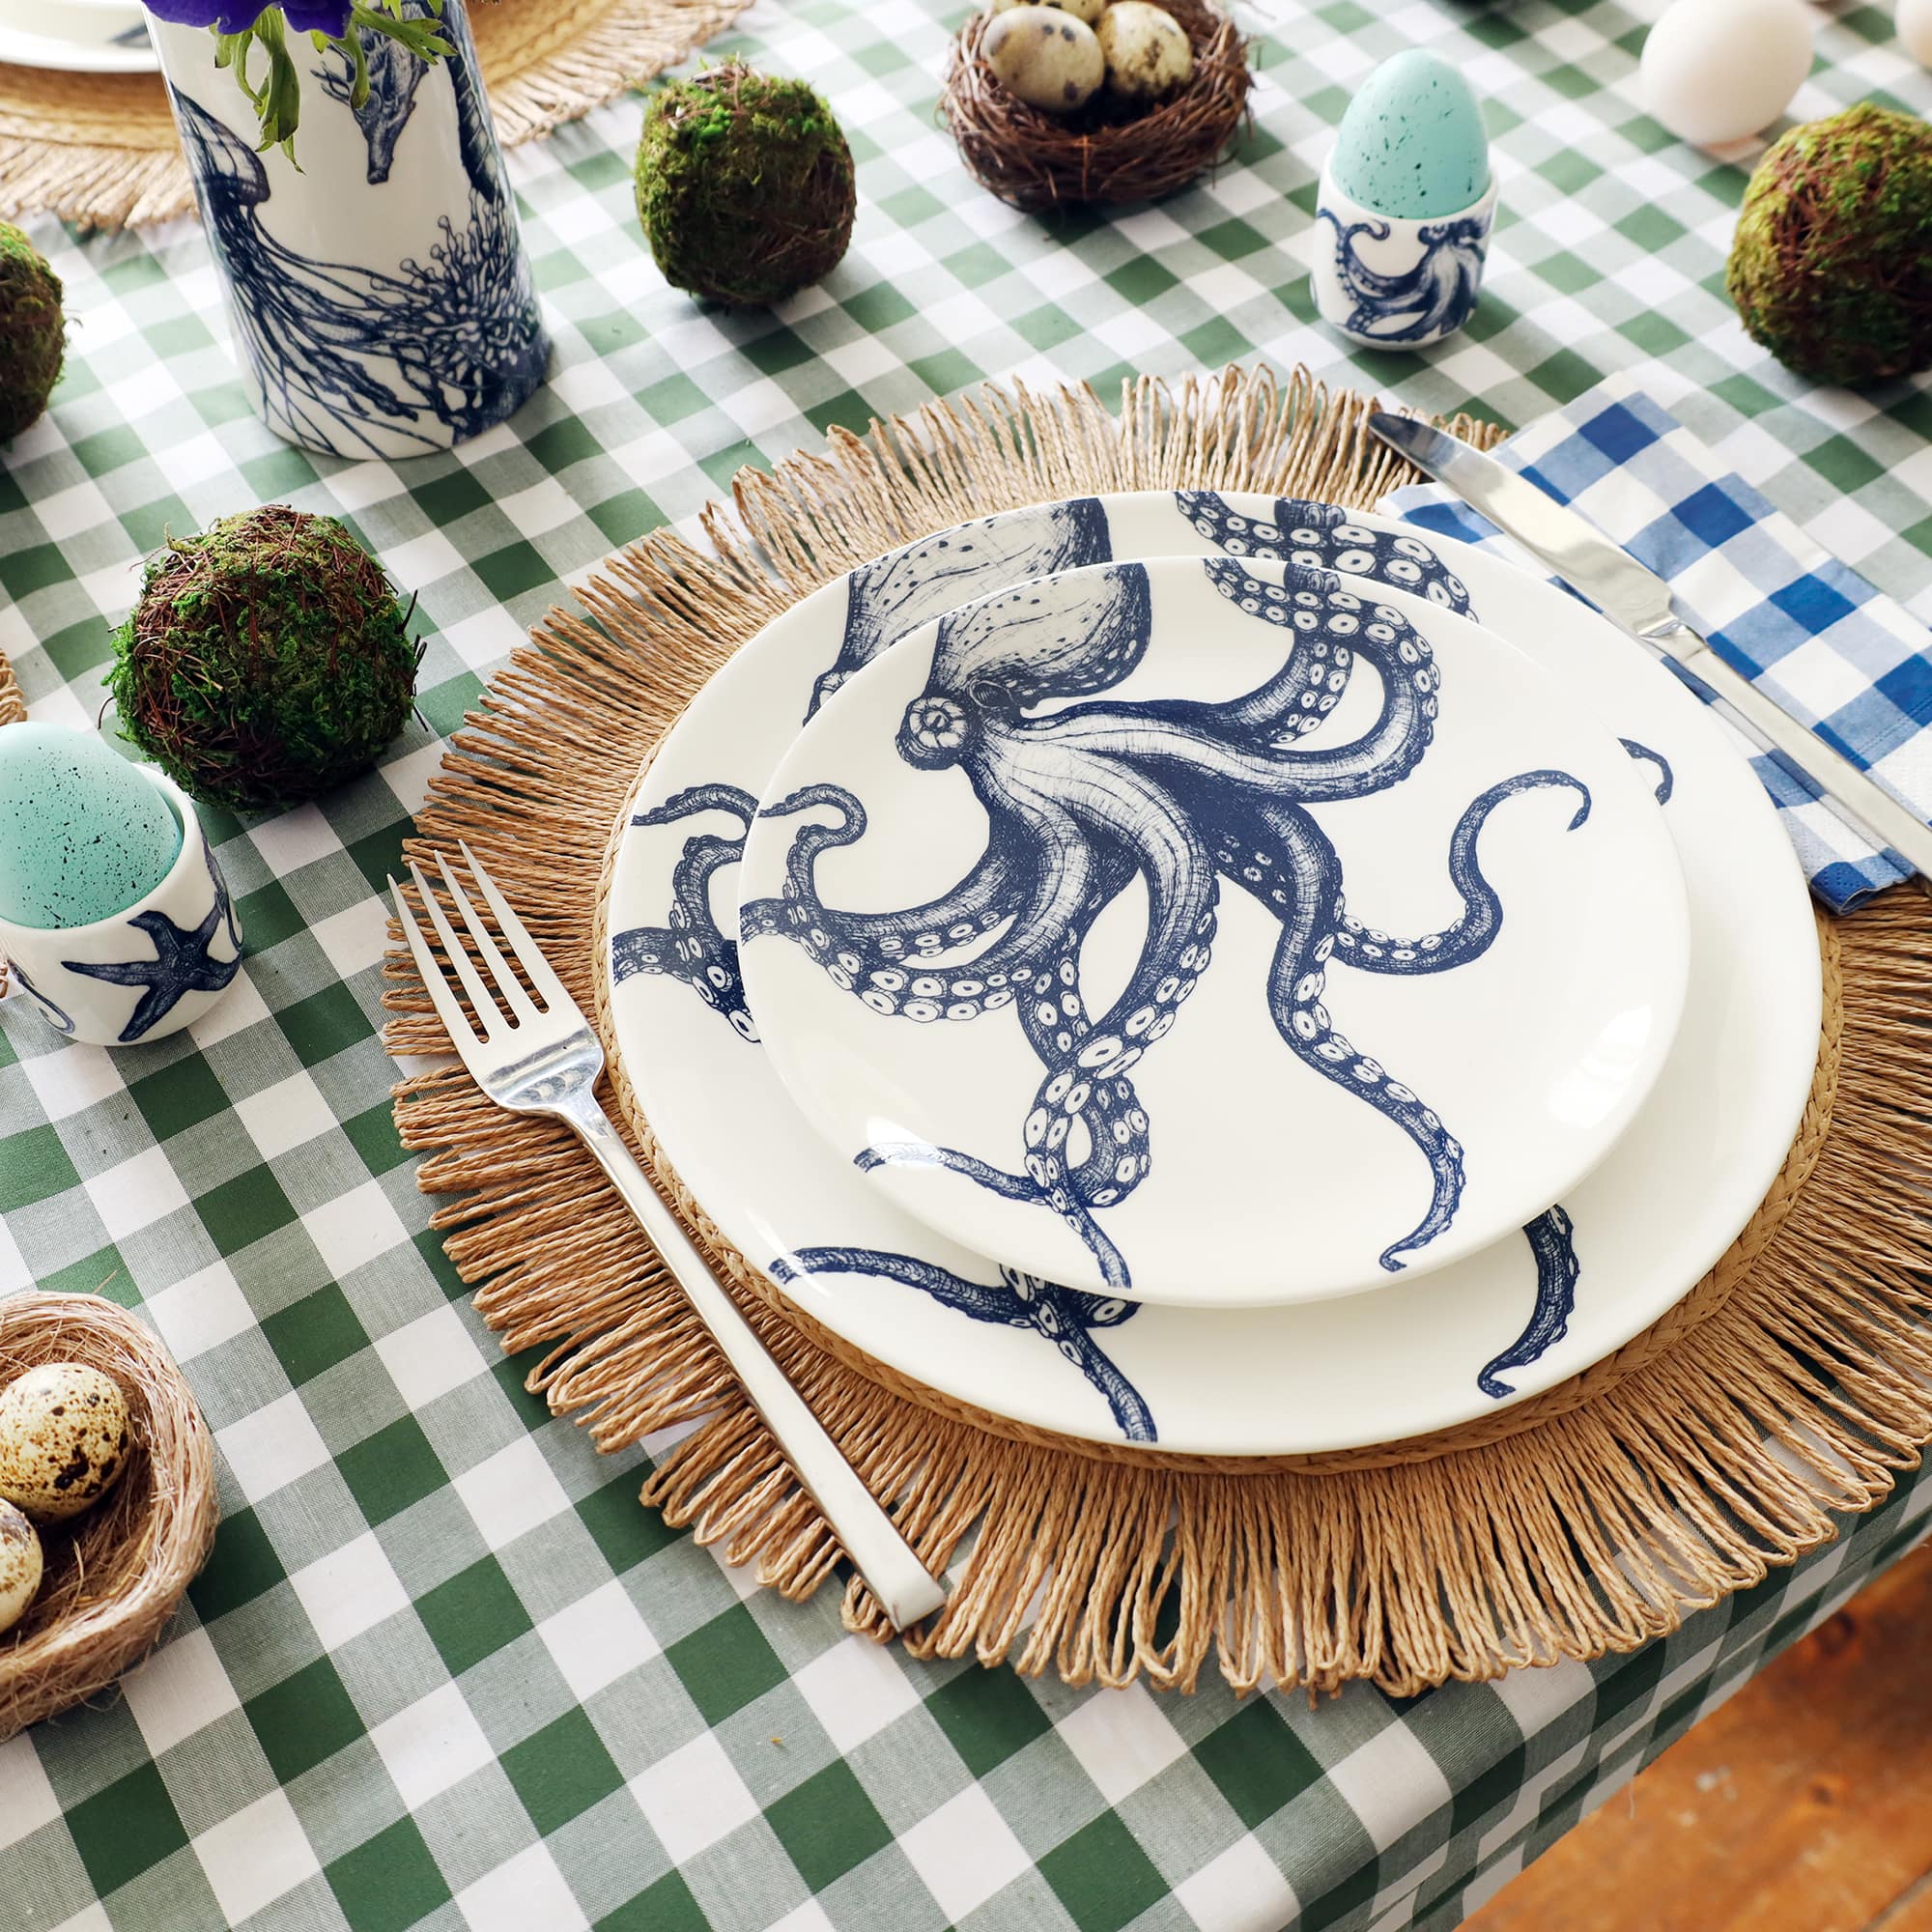 2 white plates on top of each other each with a navy octopus on them. They are on top of a raffia placemat on a green checked tablecloth with balls of moss and eggs for easter on the table.